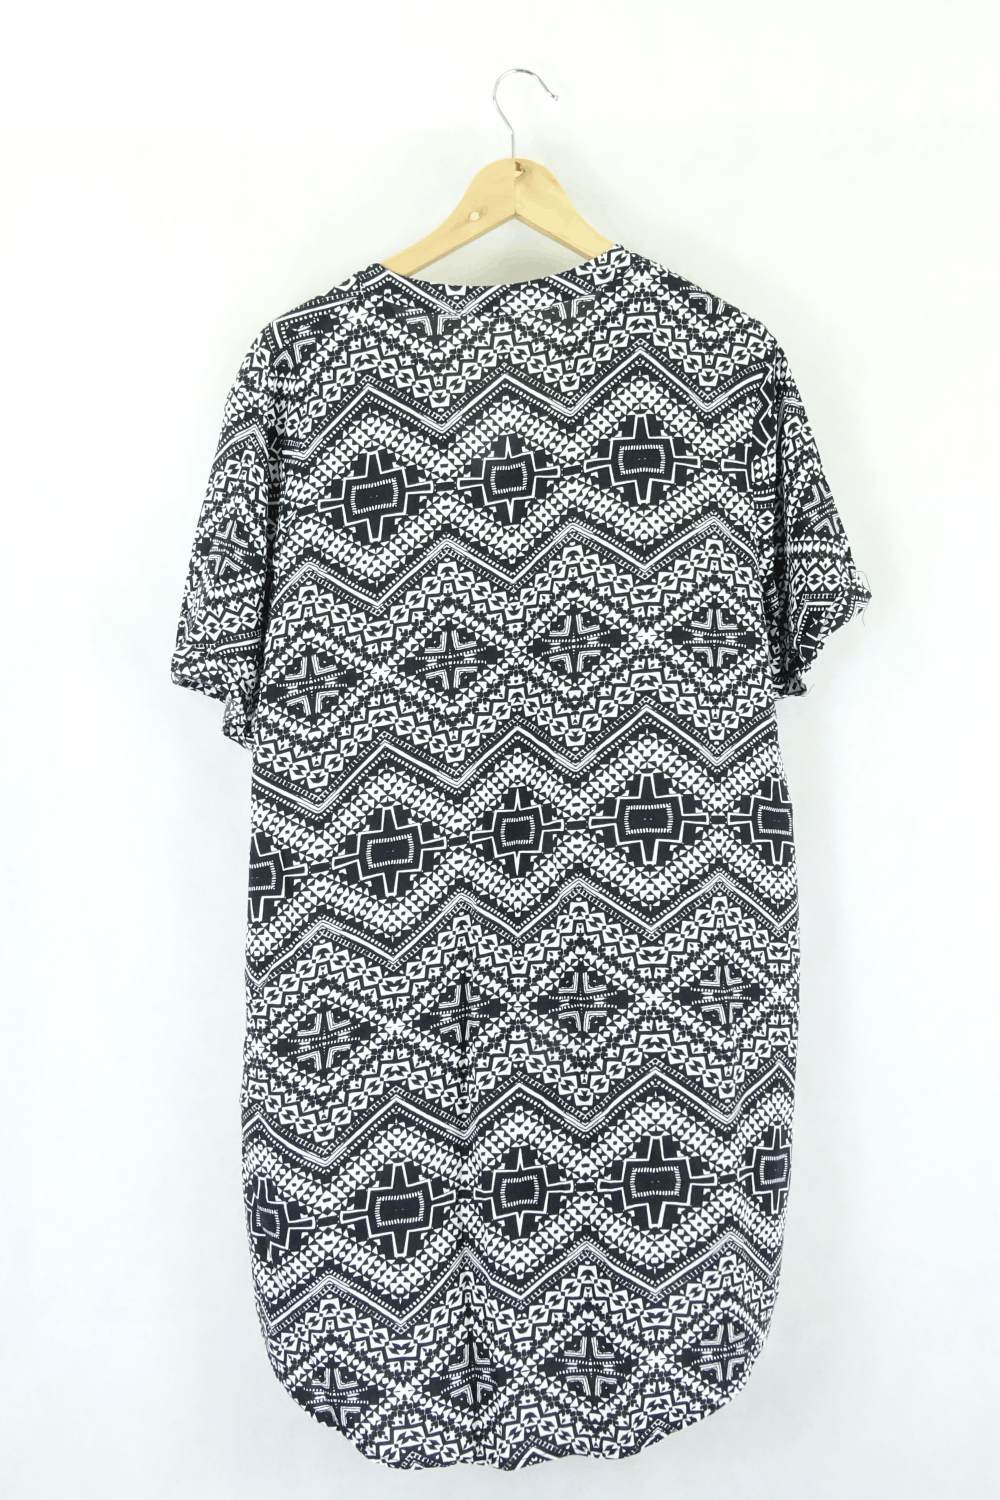 Arel The Label Black And White Geometric Dress M